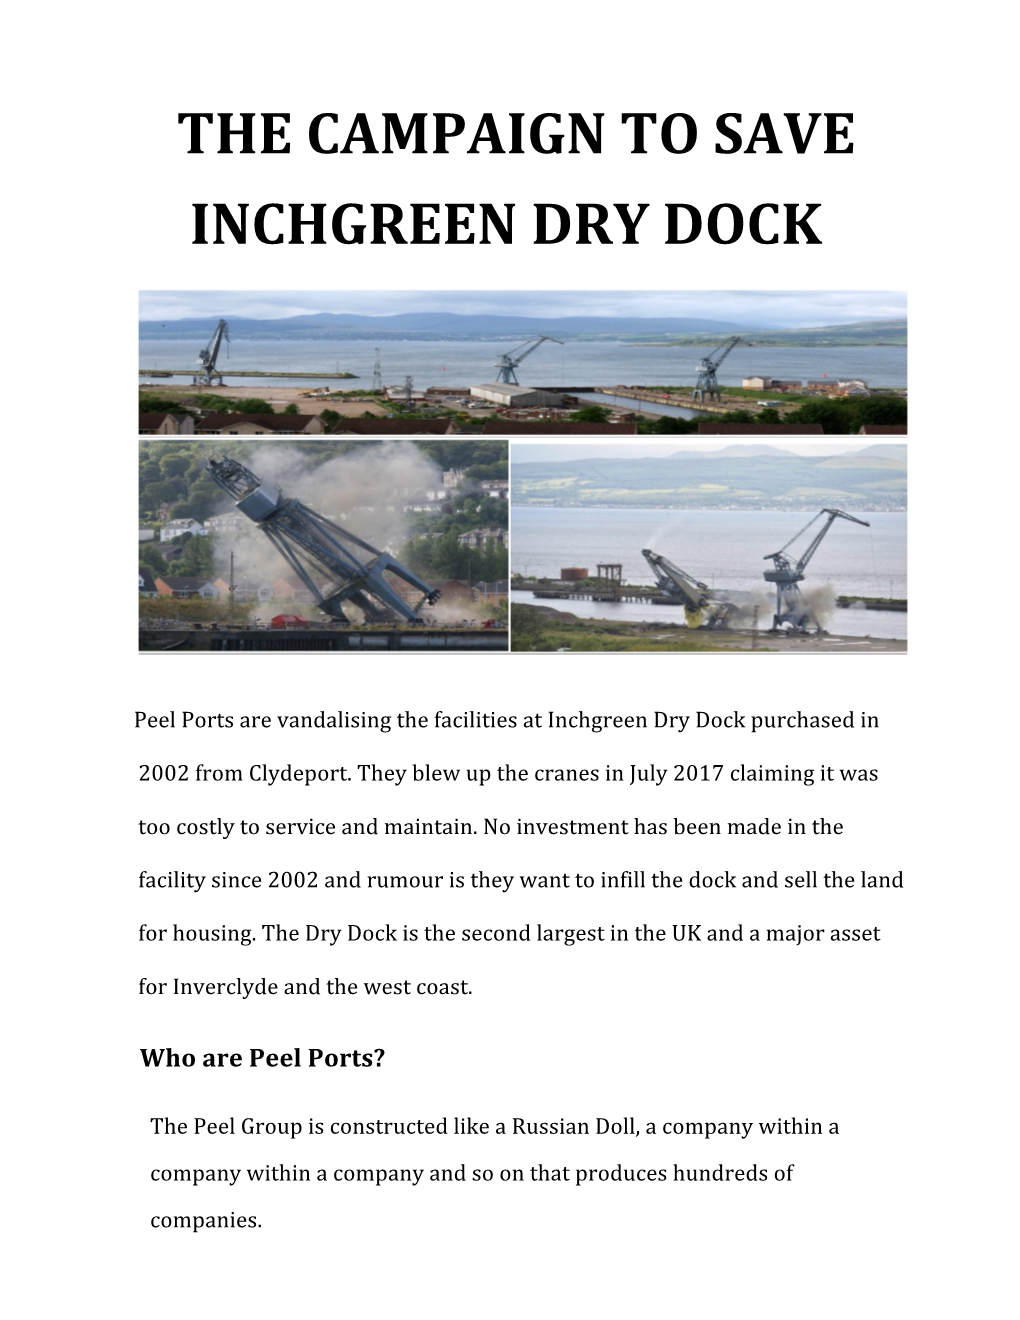 The Campaign to Save Inchgreen Dry Dock